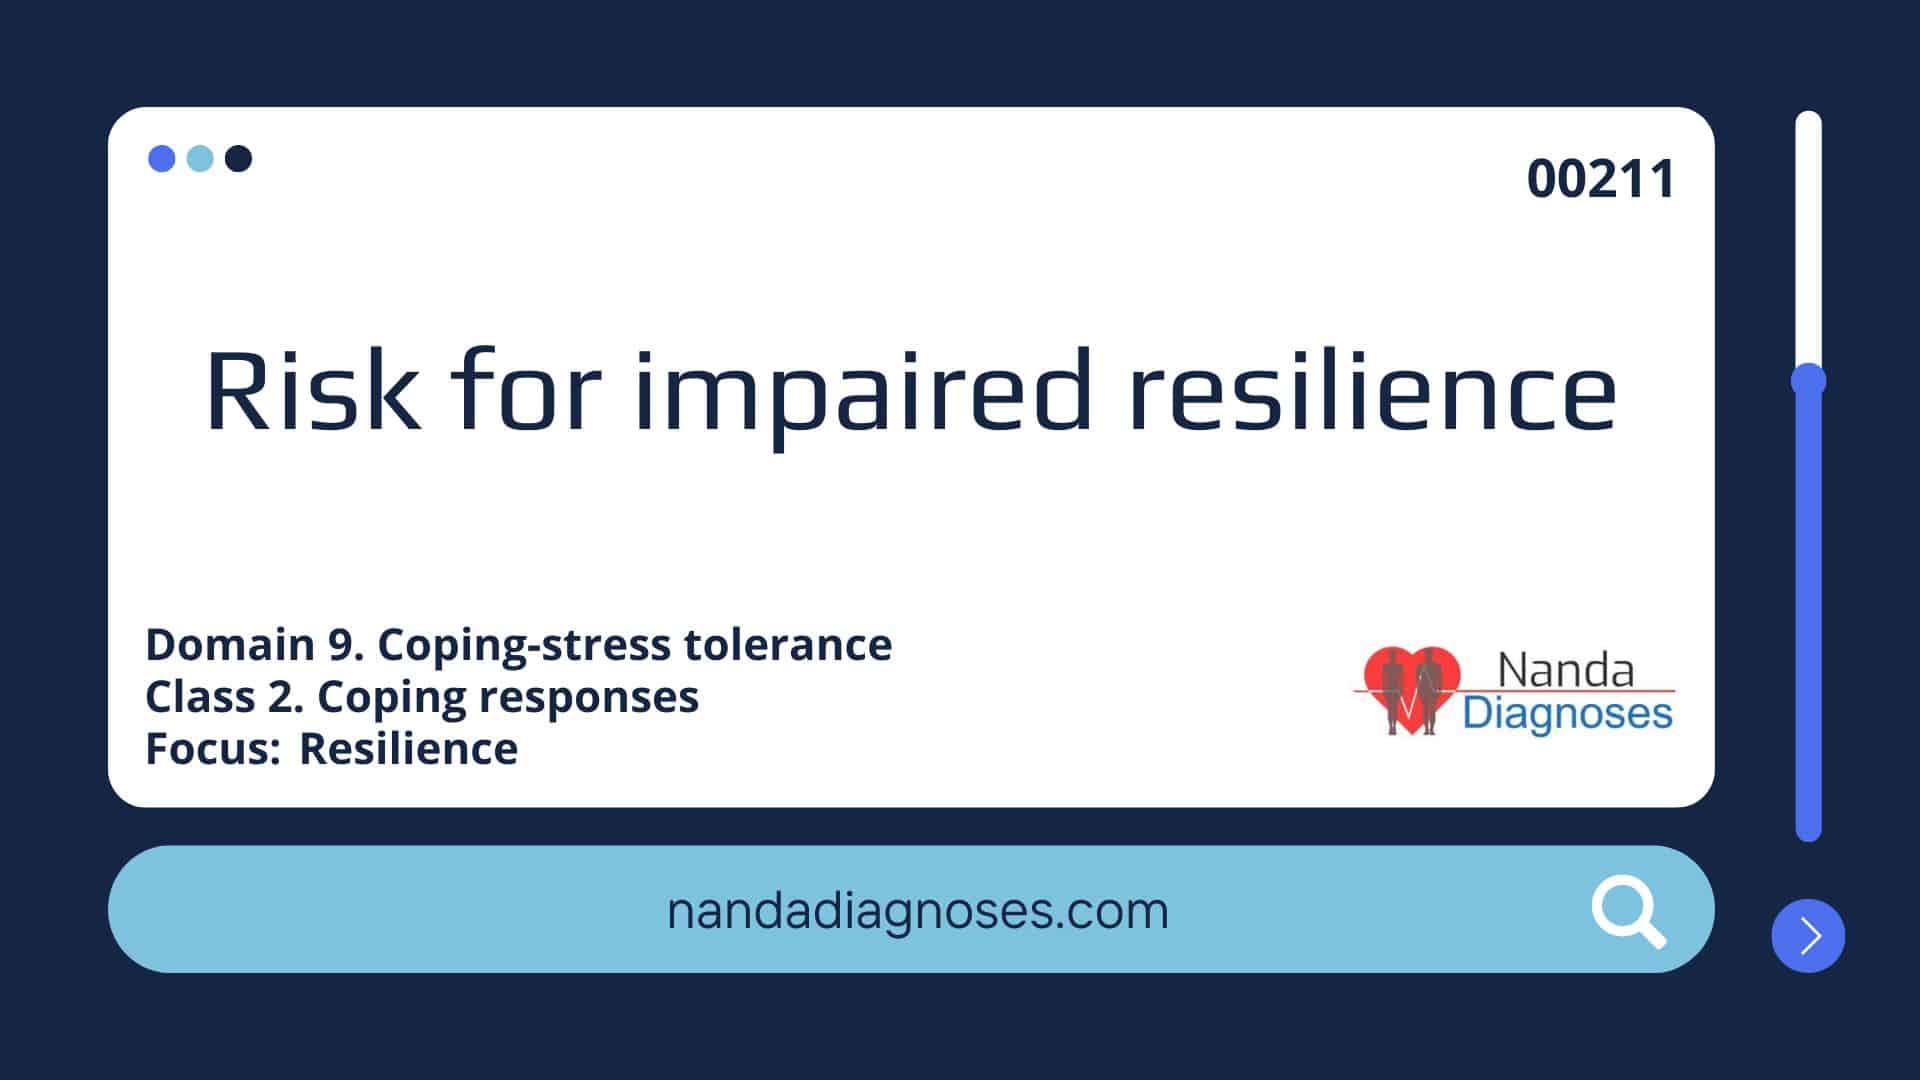 Nursing diagnosis Risk for impaired resilience